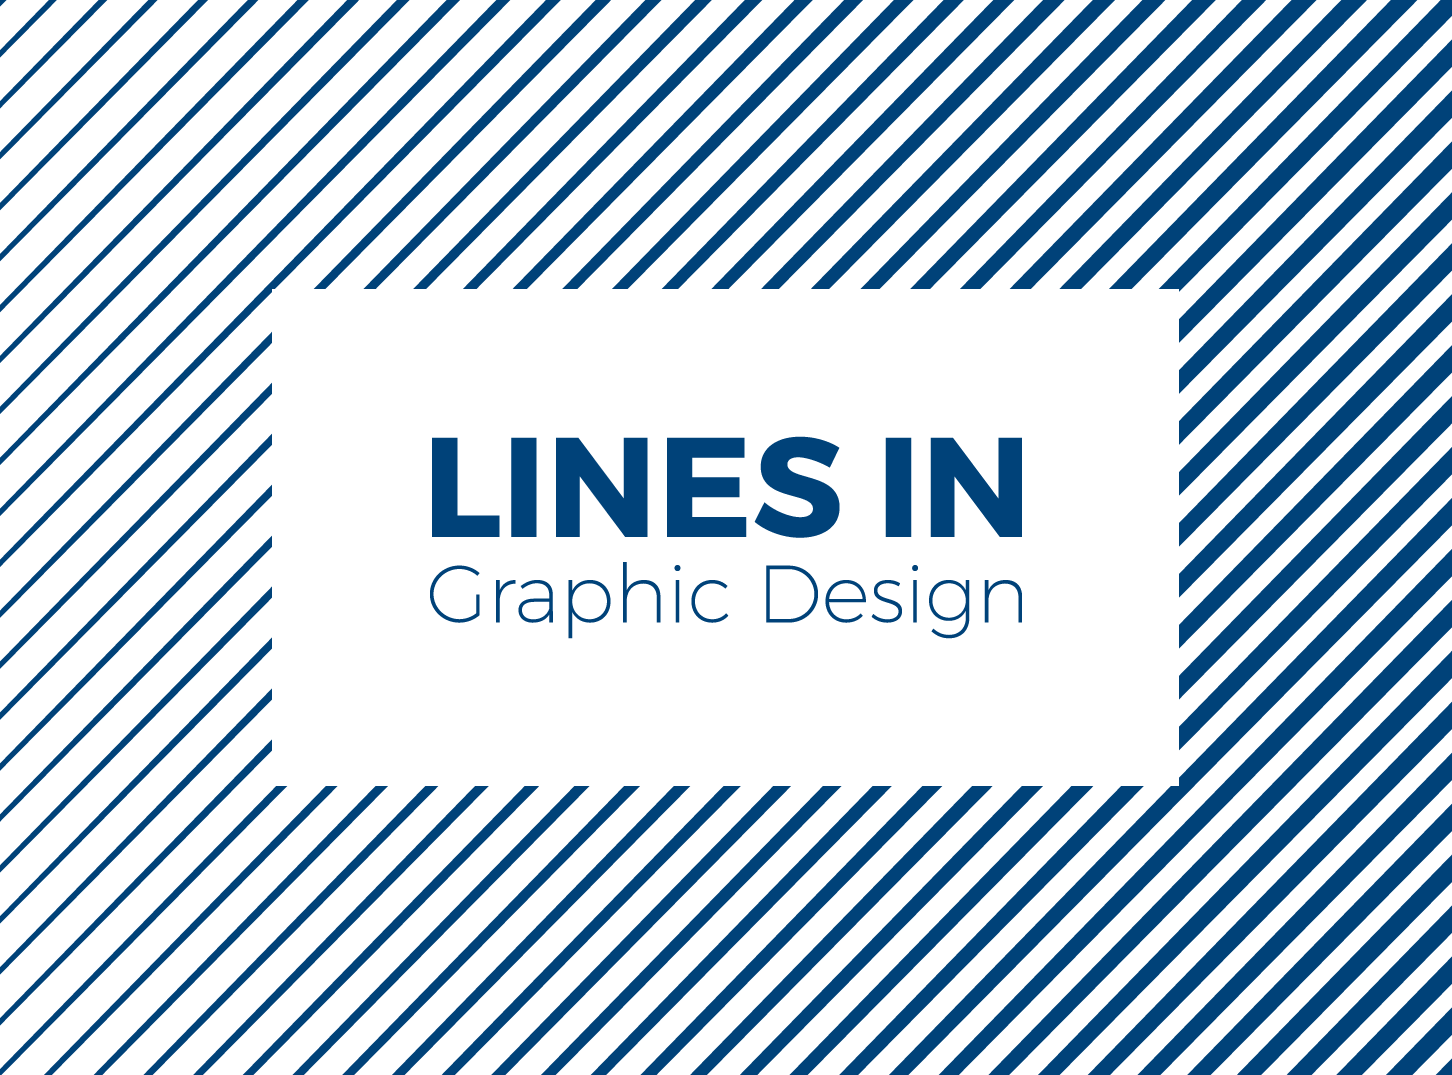 Did you know about types of lines in graphic design?, by Subarna Creative